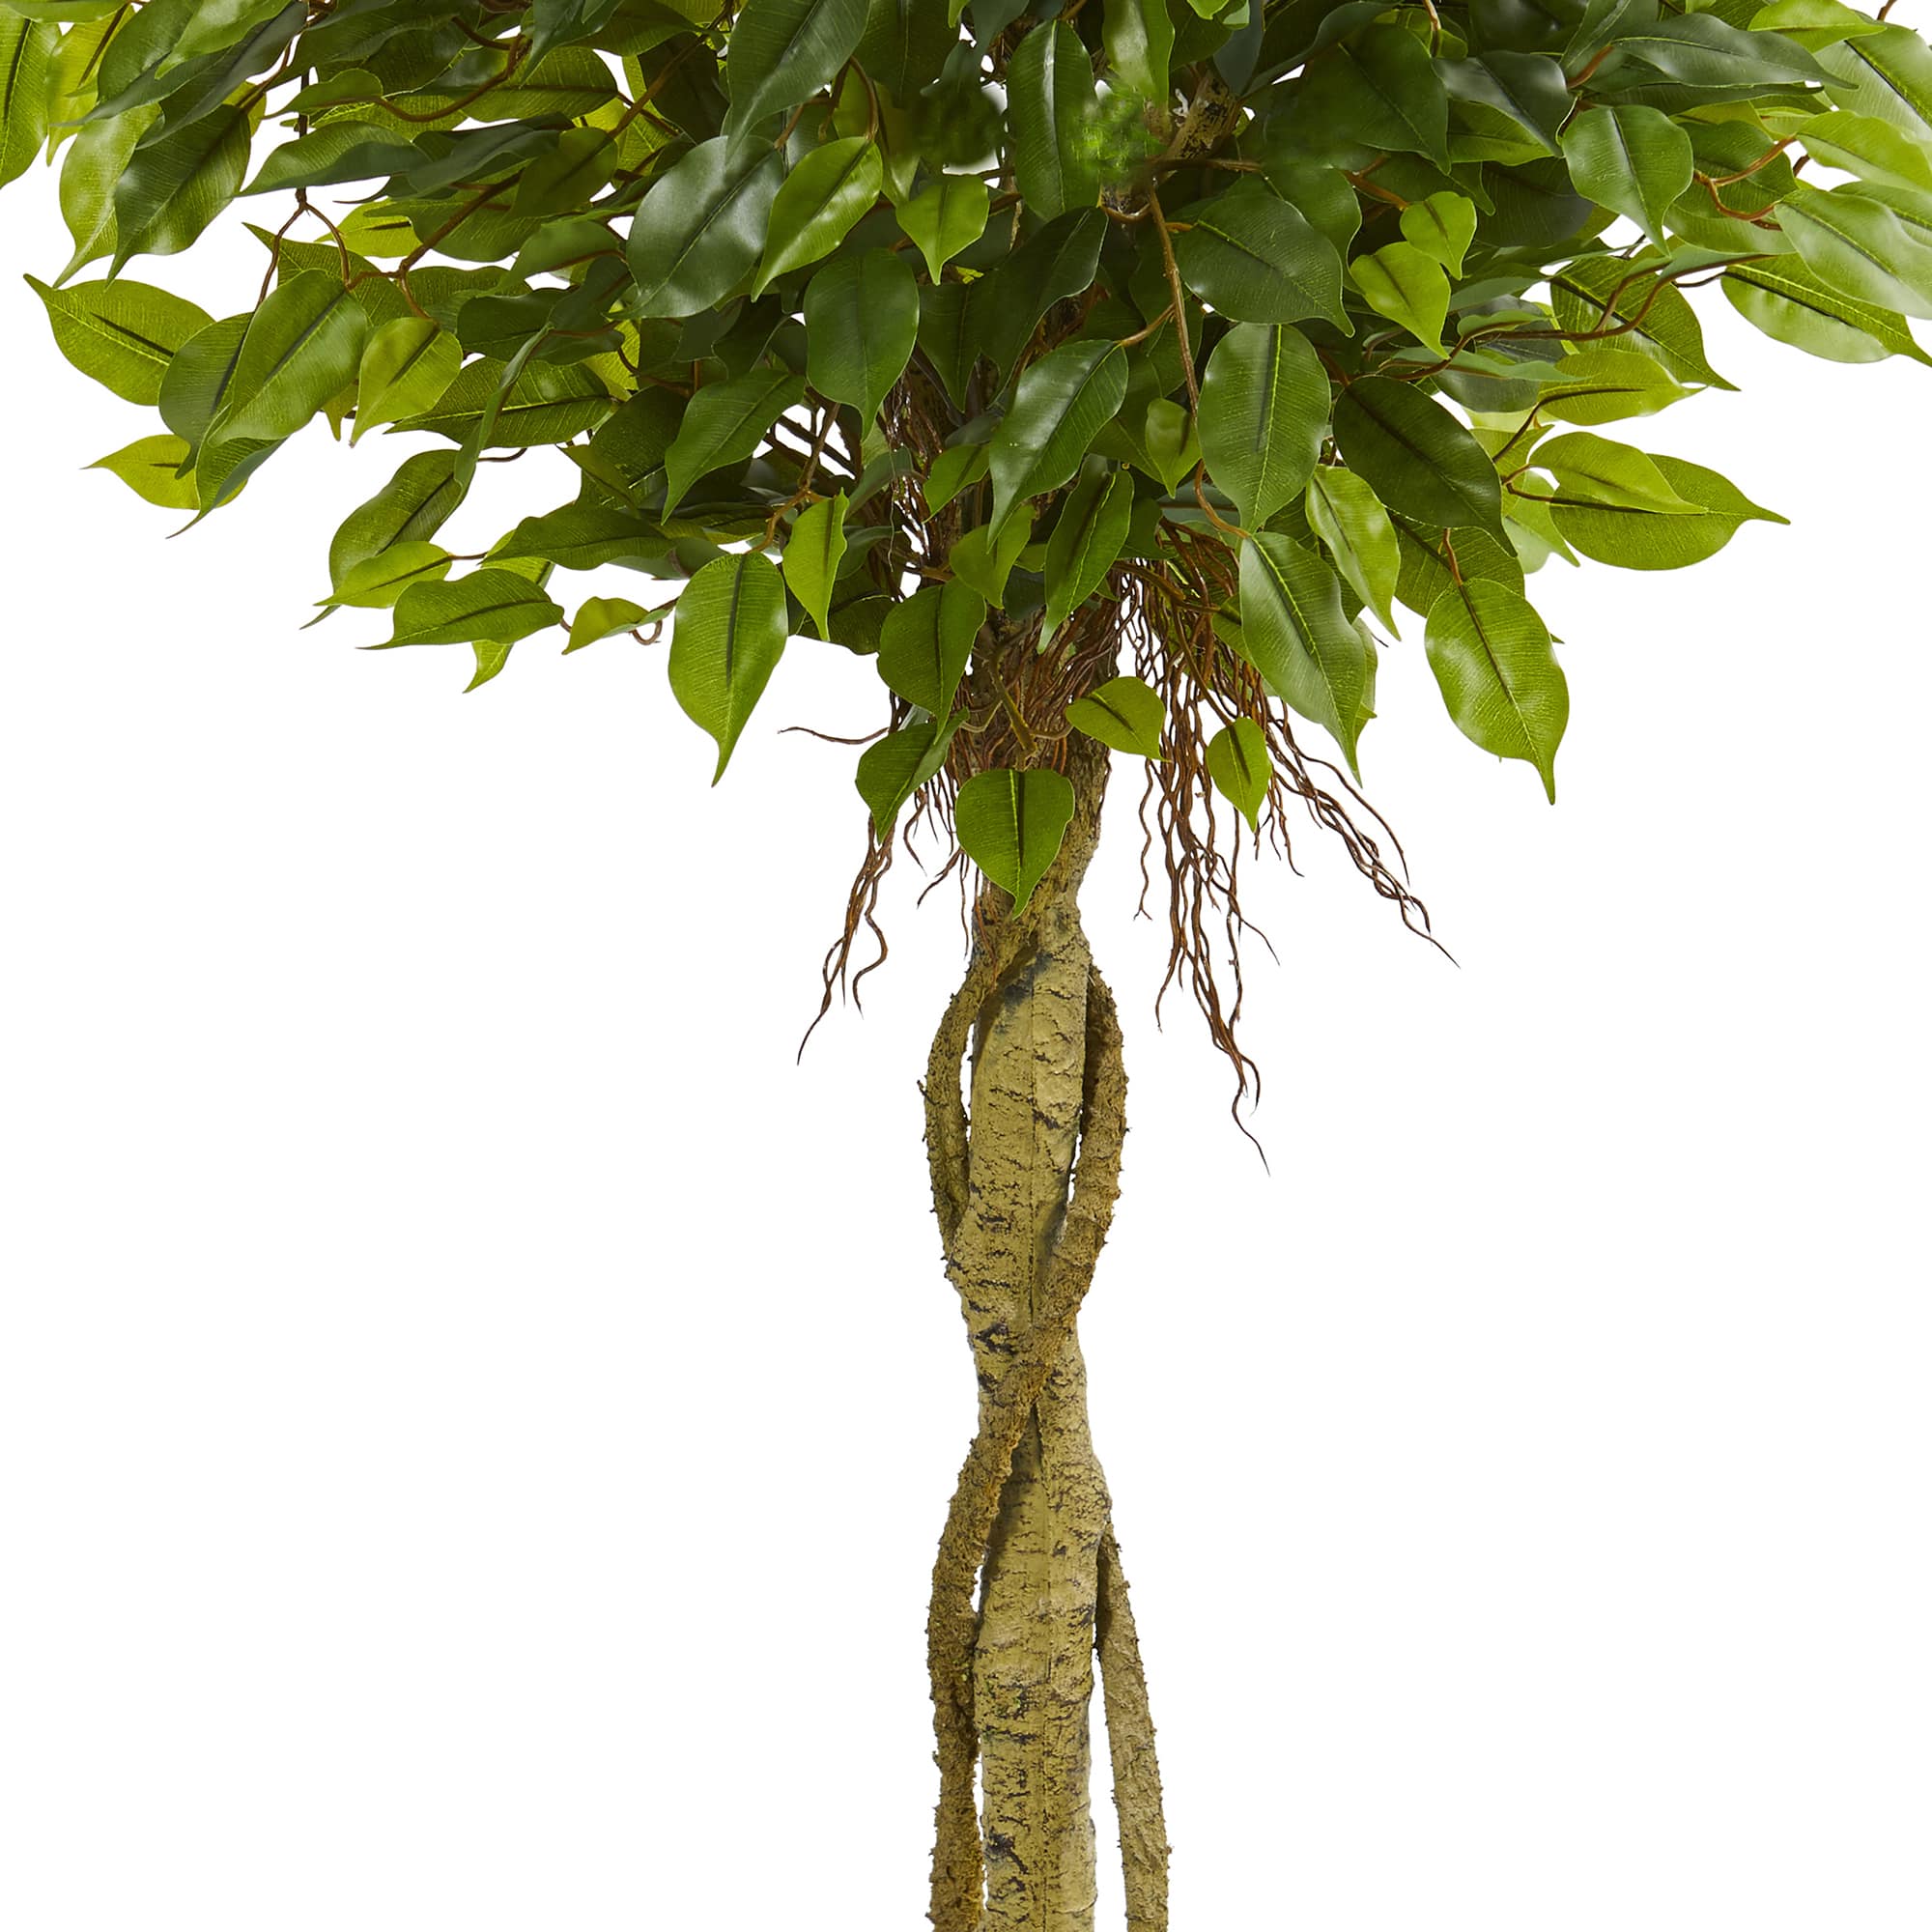 4ft. Potted Ficus Topiary Tree